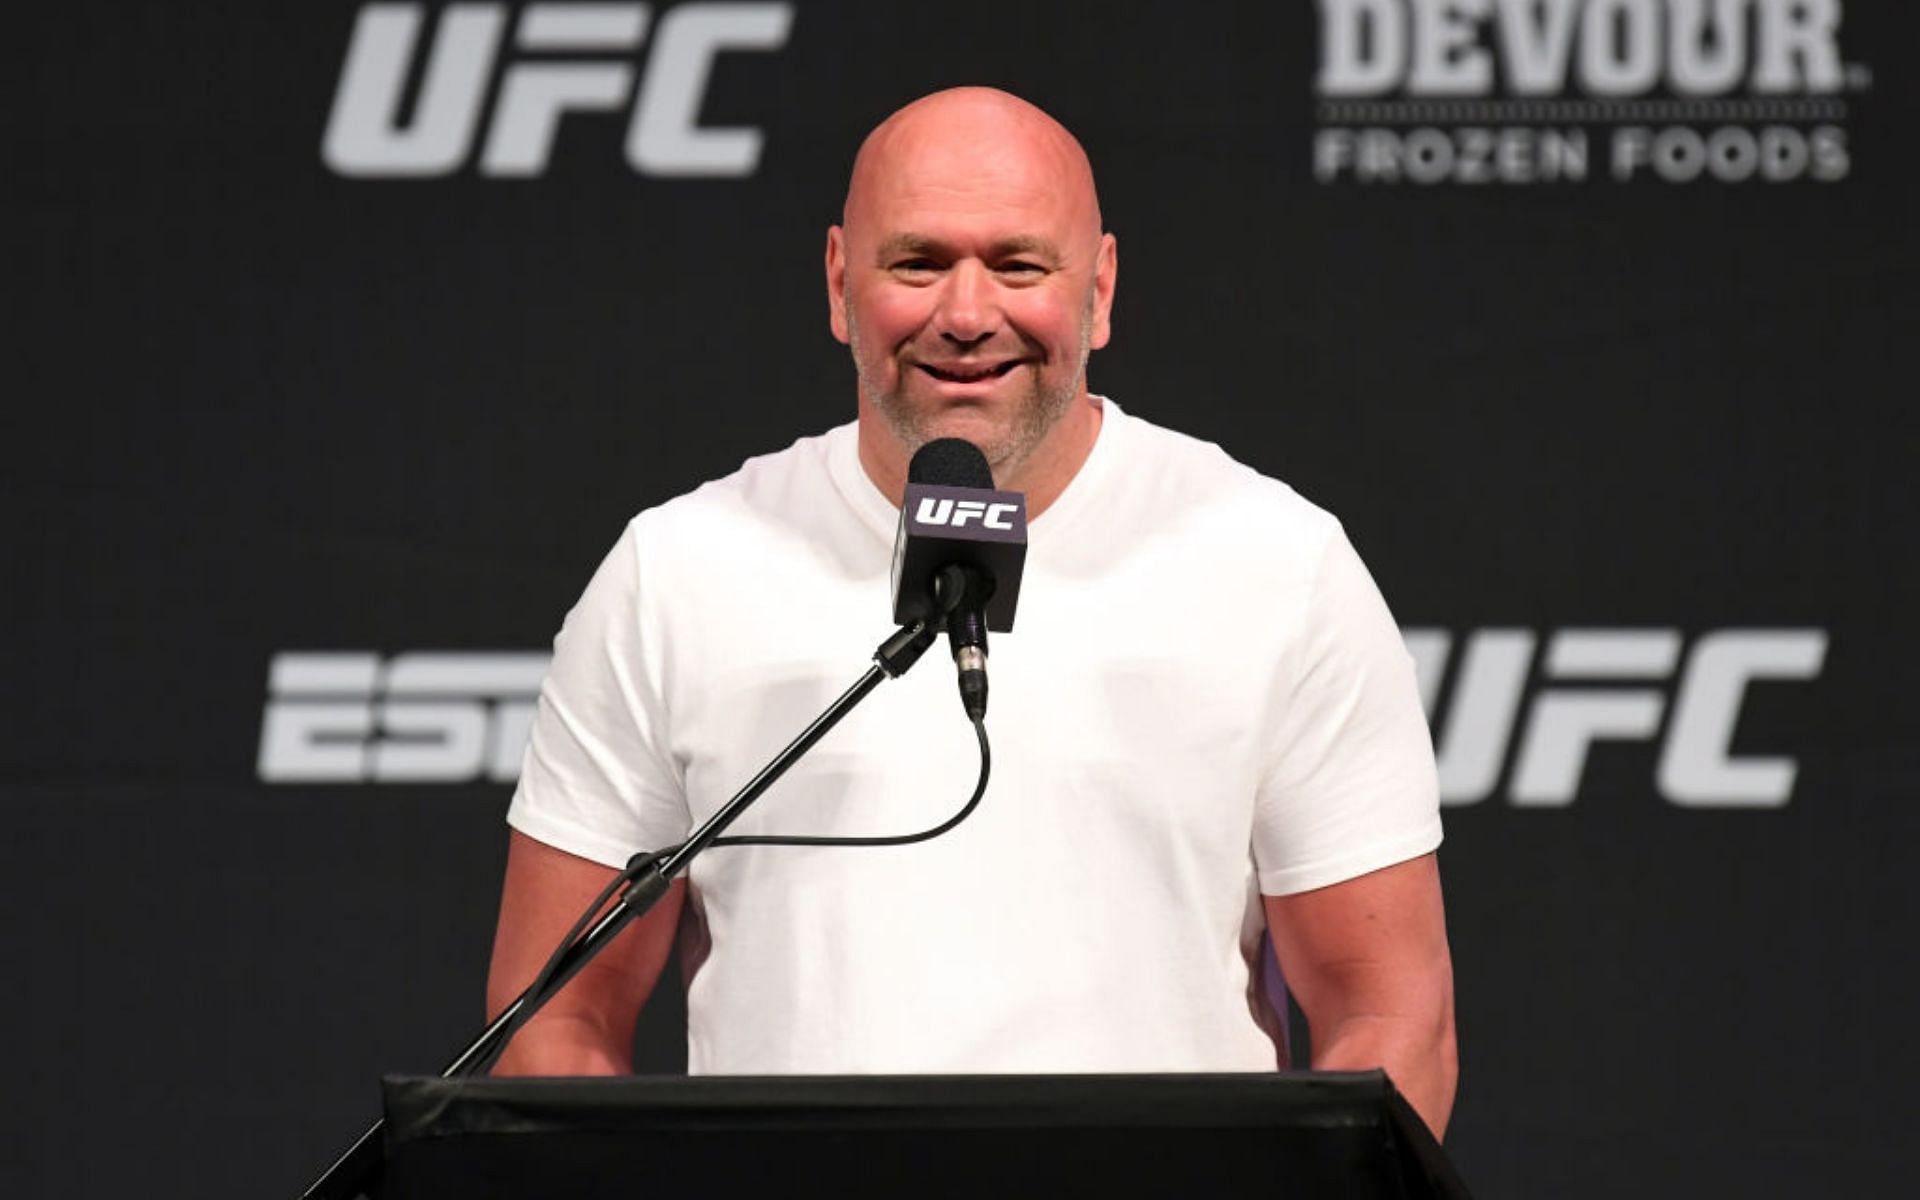 The UFC President, Dana White, is a magnanimous man